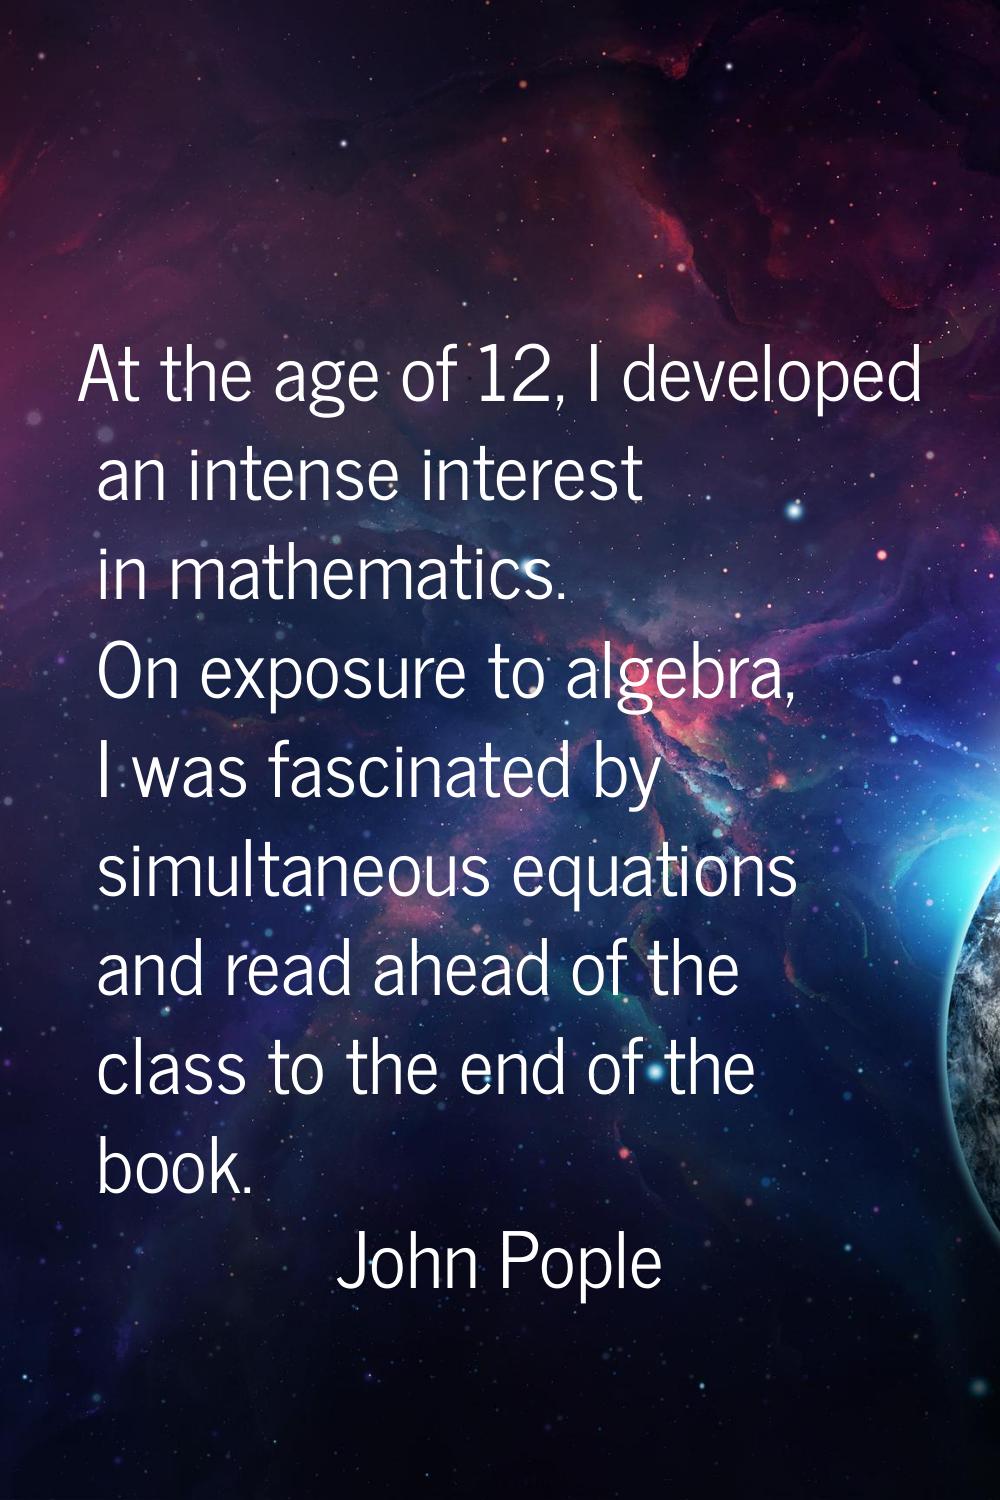 At the age of 12, I developed an intense interest in mathematics. On exposure to algebra, I was fas